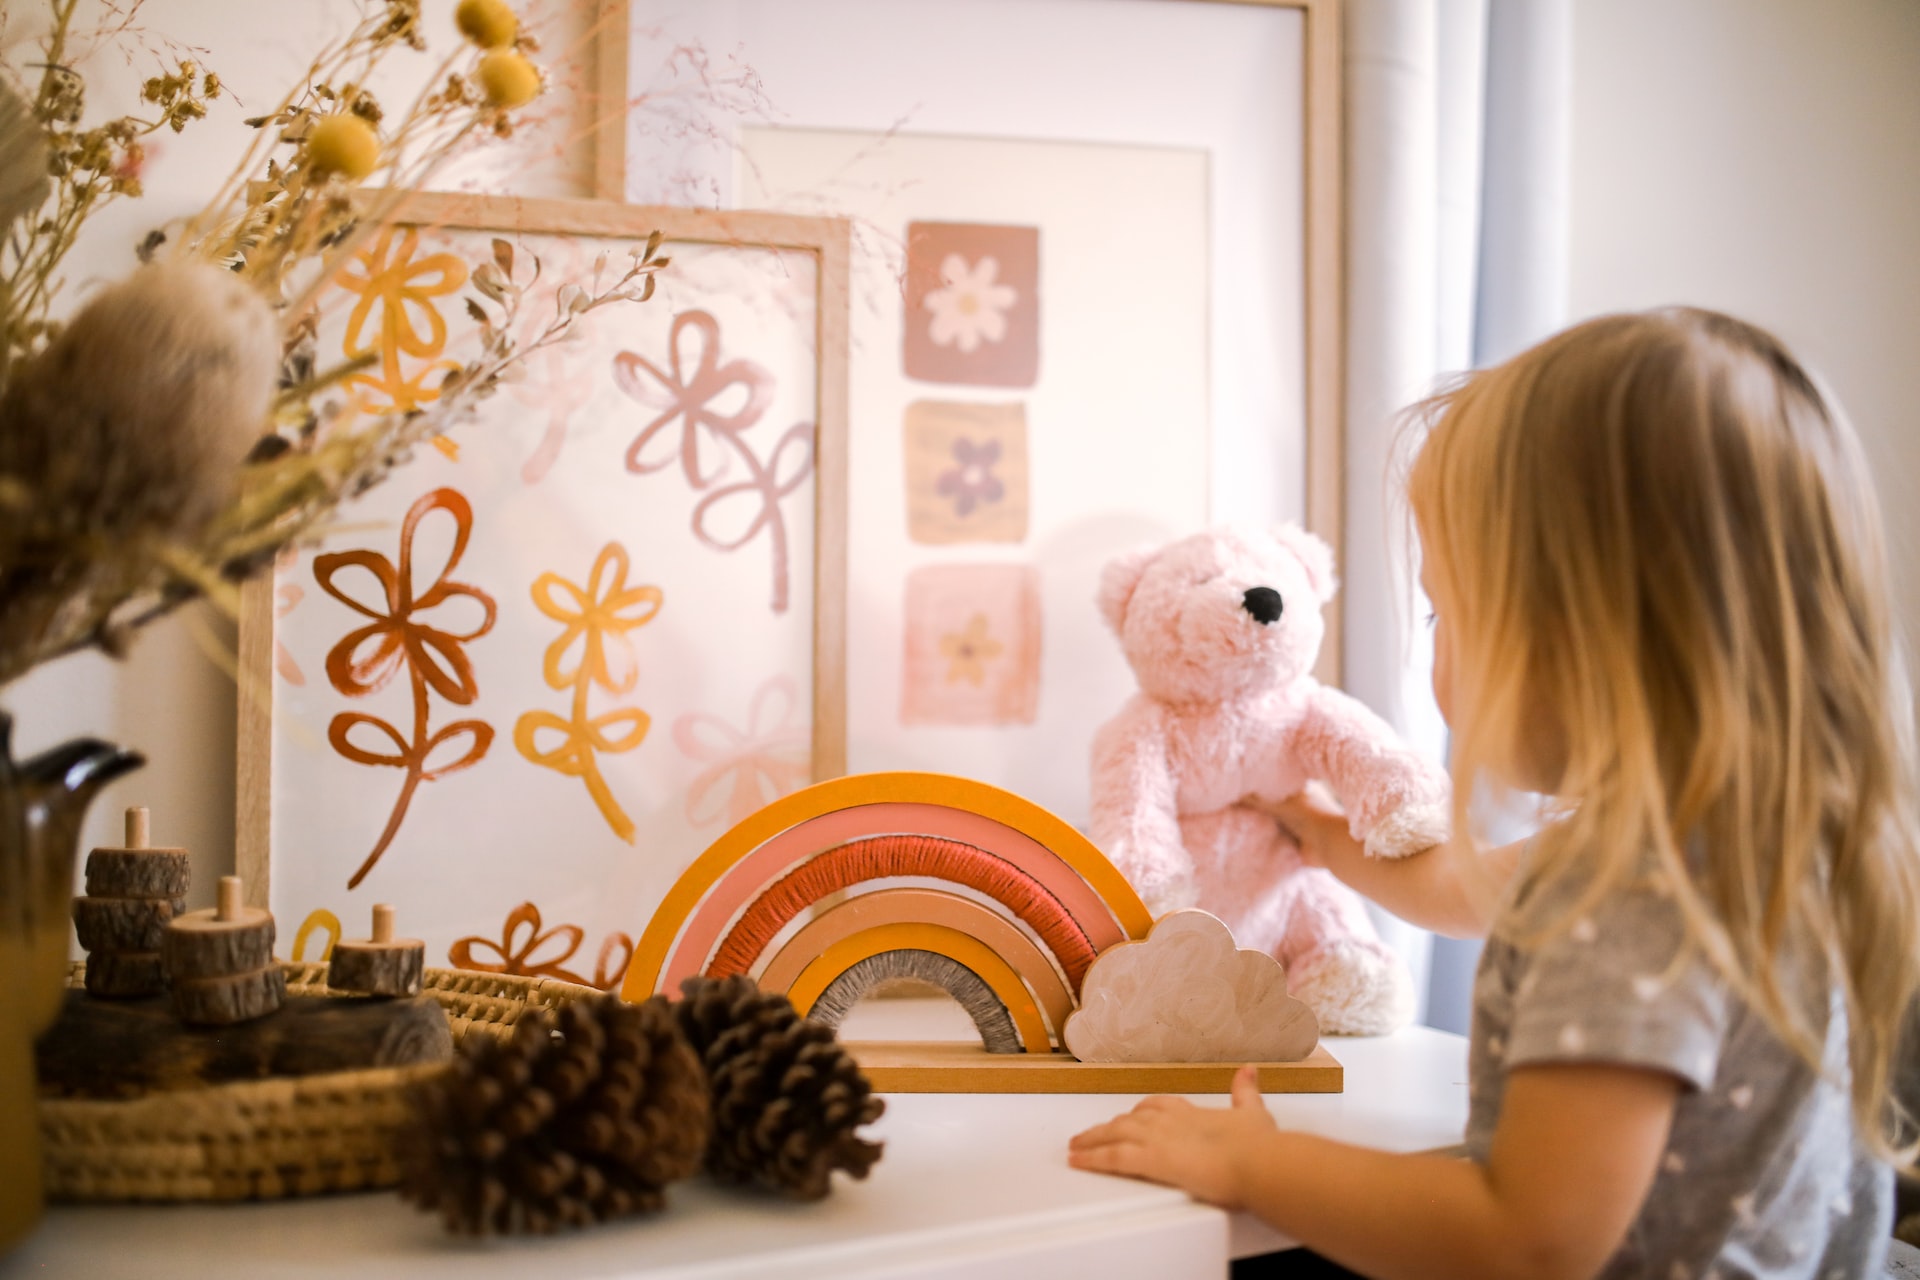 A little girl with blonde hair stands at a low shelf with artwork and a small teddy bear.